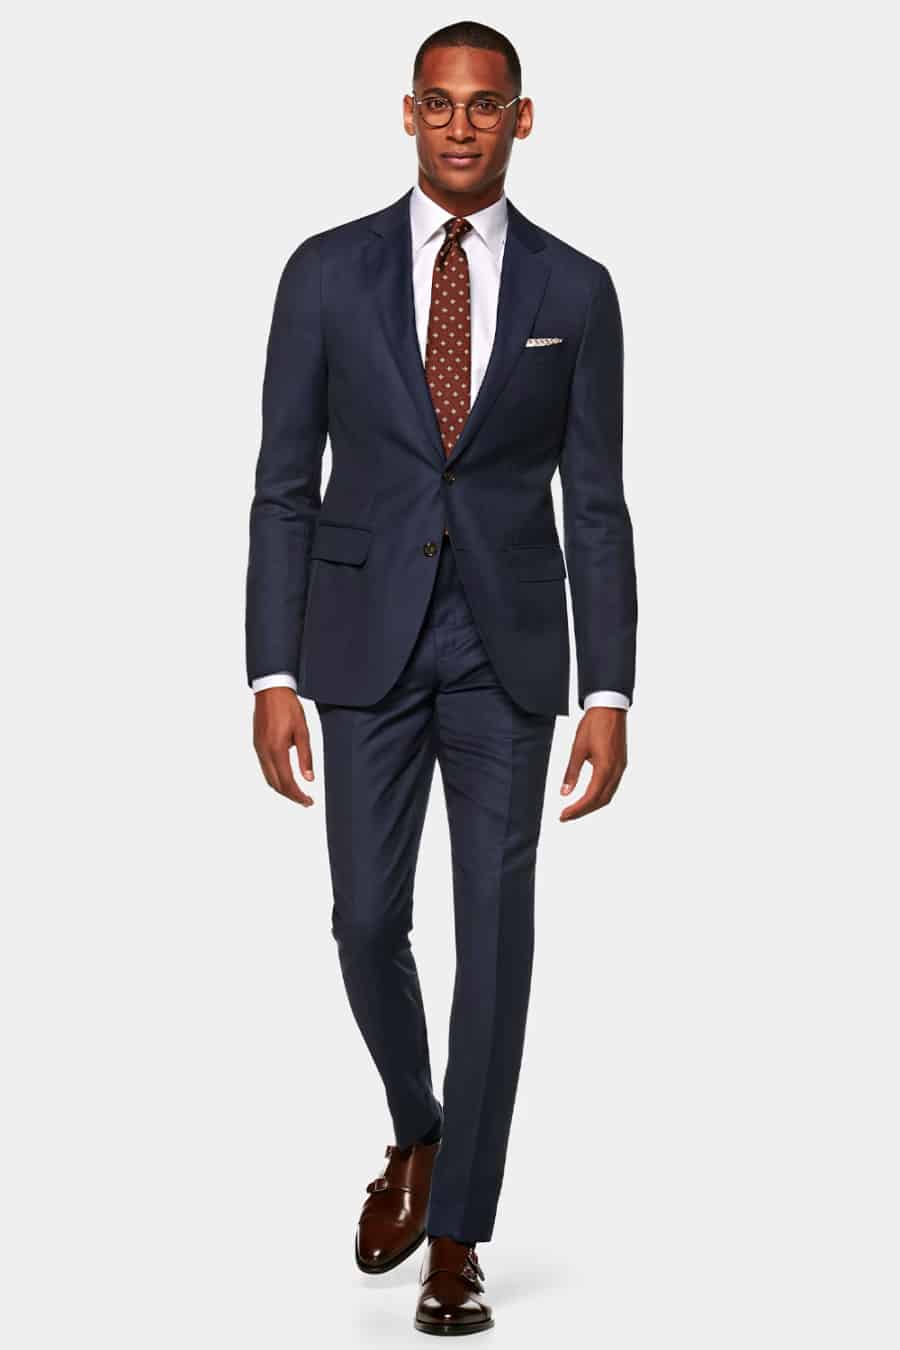 Men's navy suit worn with brown monk-strap shoes